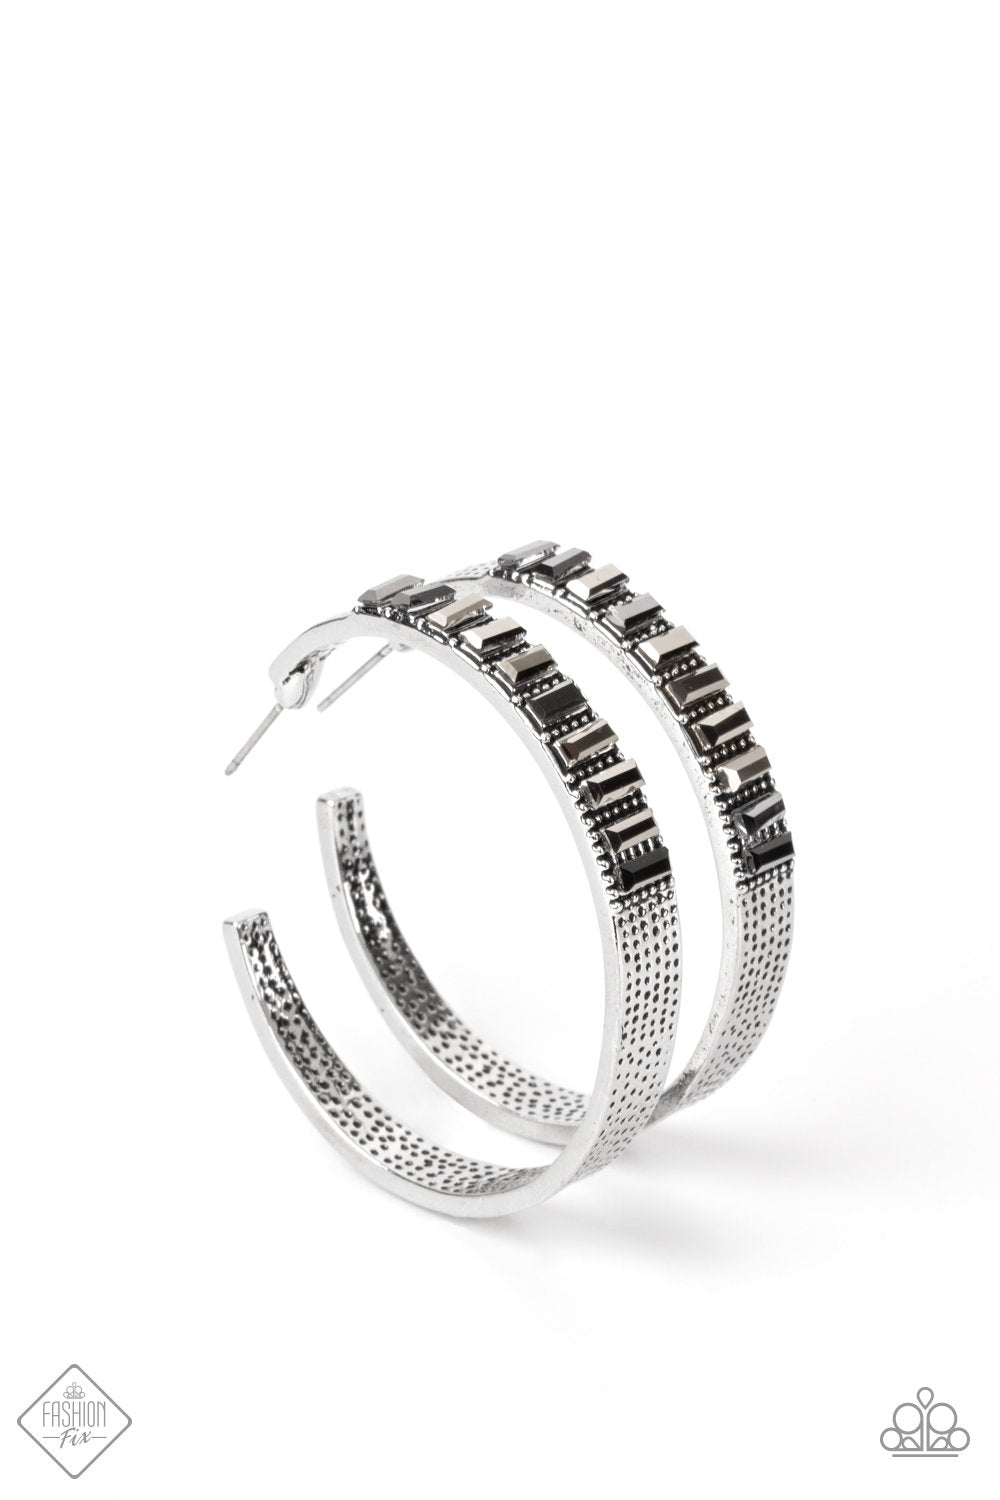 More To Love Silver Hematite Rhinestone Hoop Earrings - Paparazzi Accessories- lightbox - CarasShop.com - $5 Jewelry by Cara Jewels